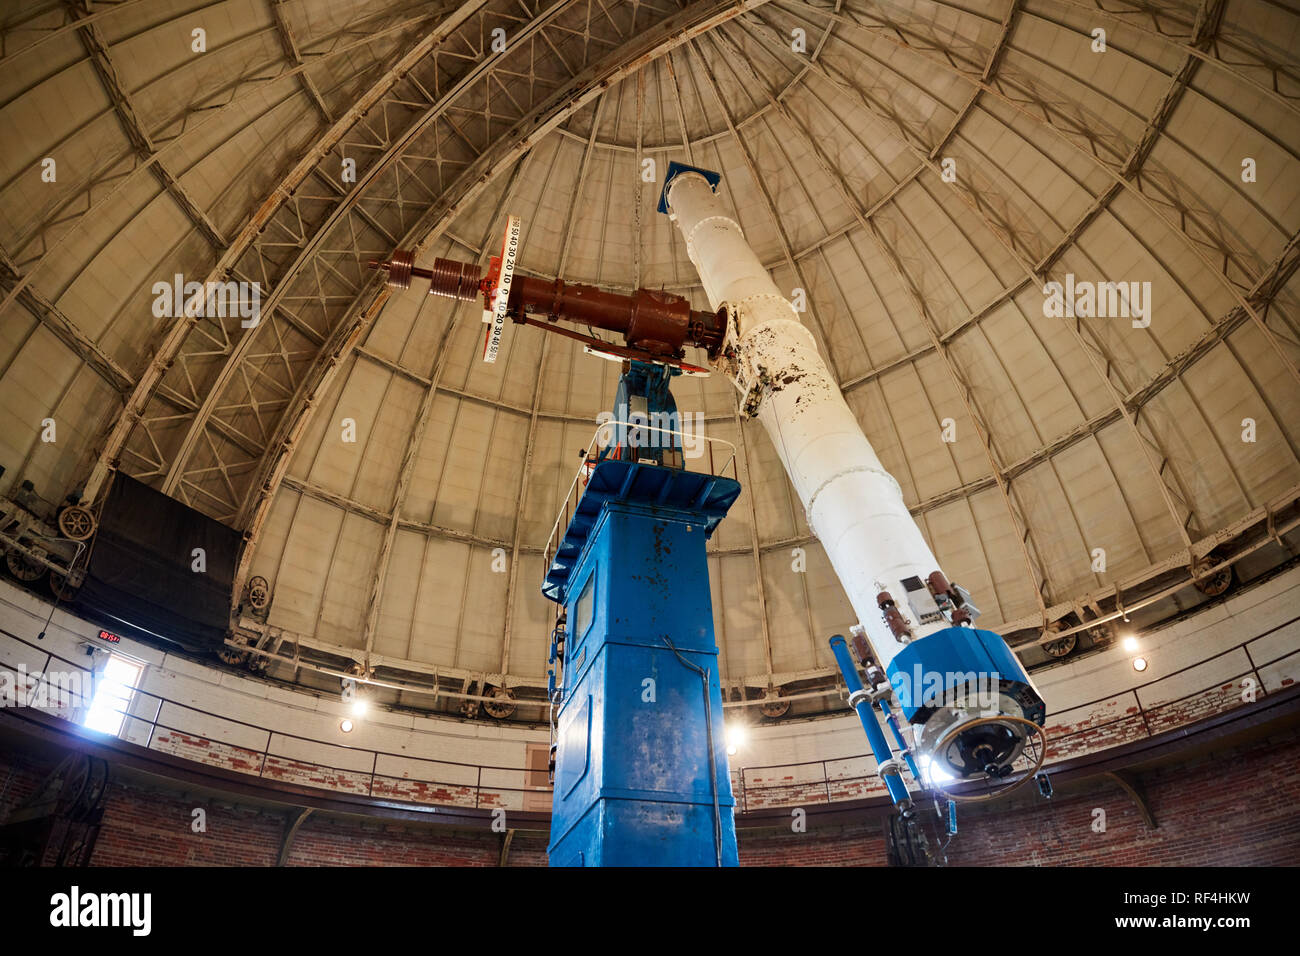 40 inch refracting telescope at Yerkes Observatory in Williams Bay, Wisconsin Stock Photo